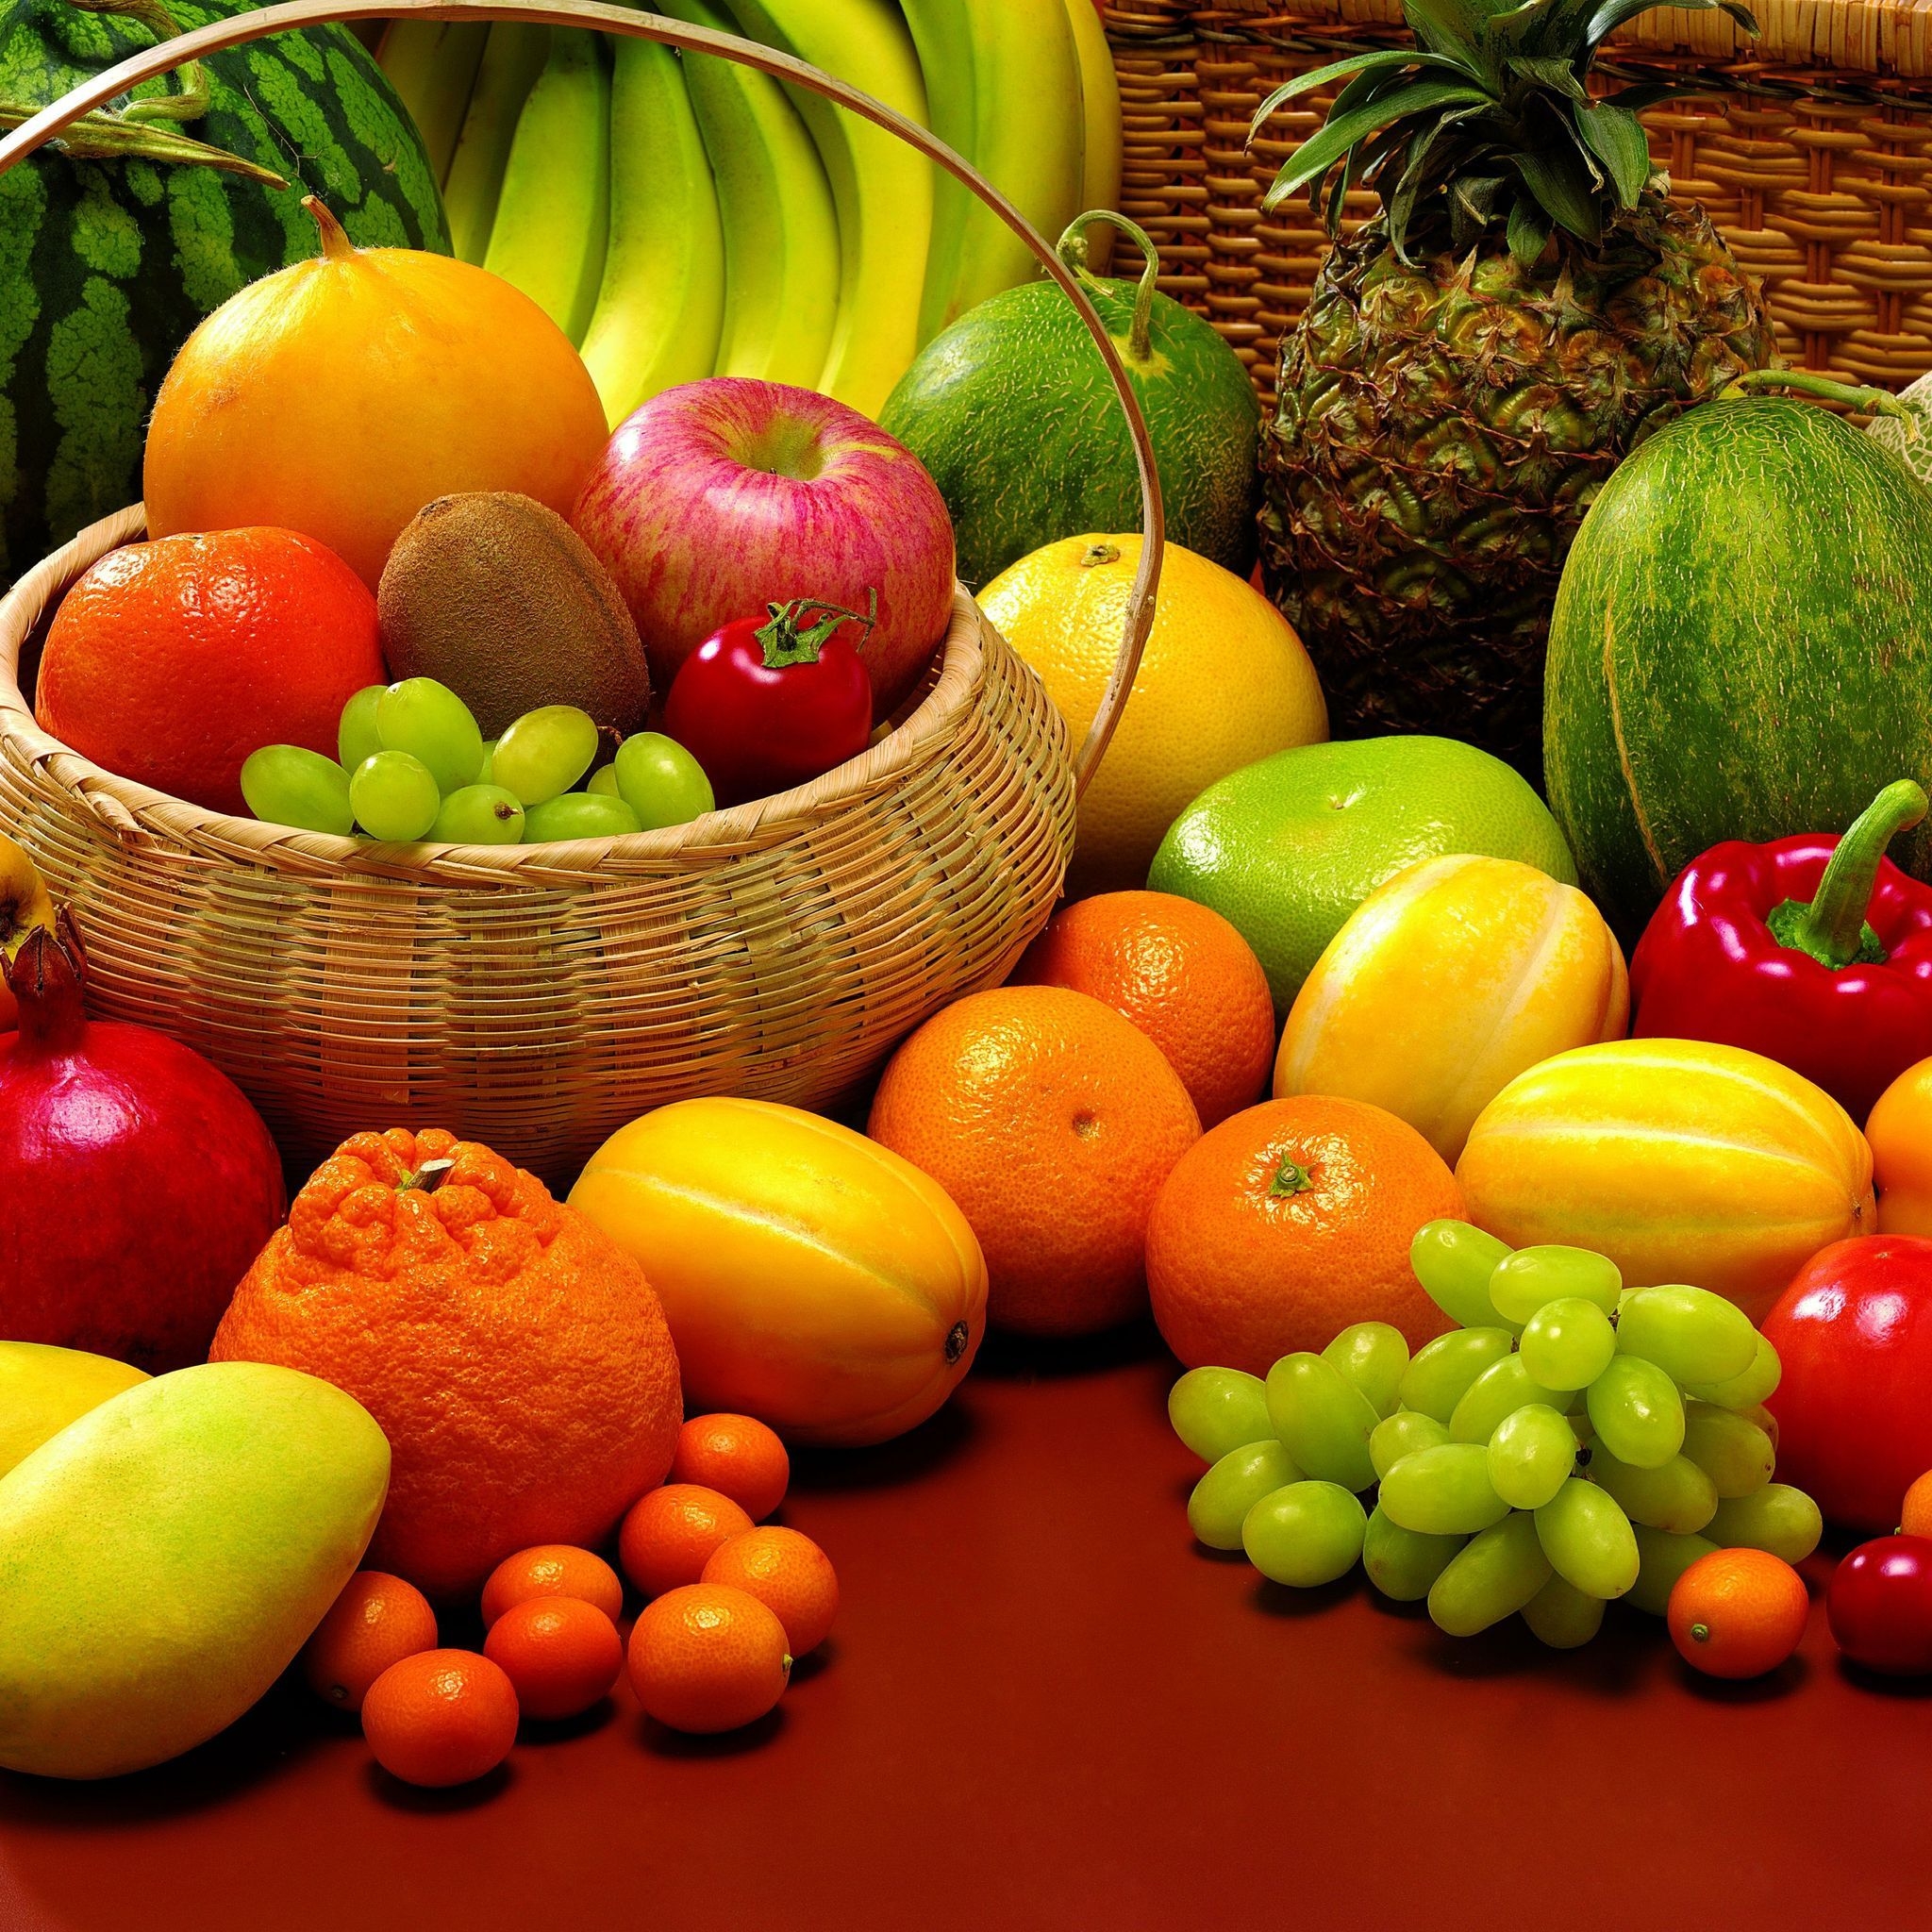 Fruits and Veggies for 2048 x 2048 New iPad resolution